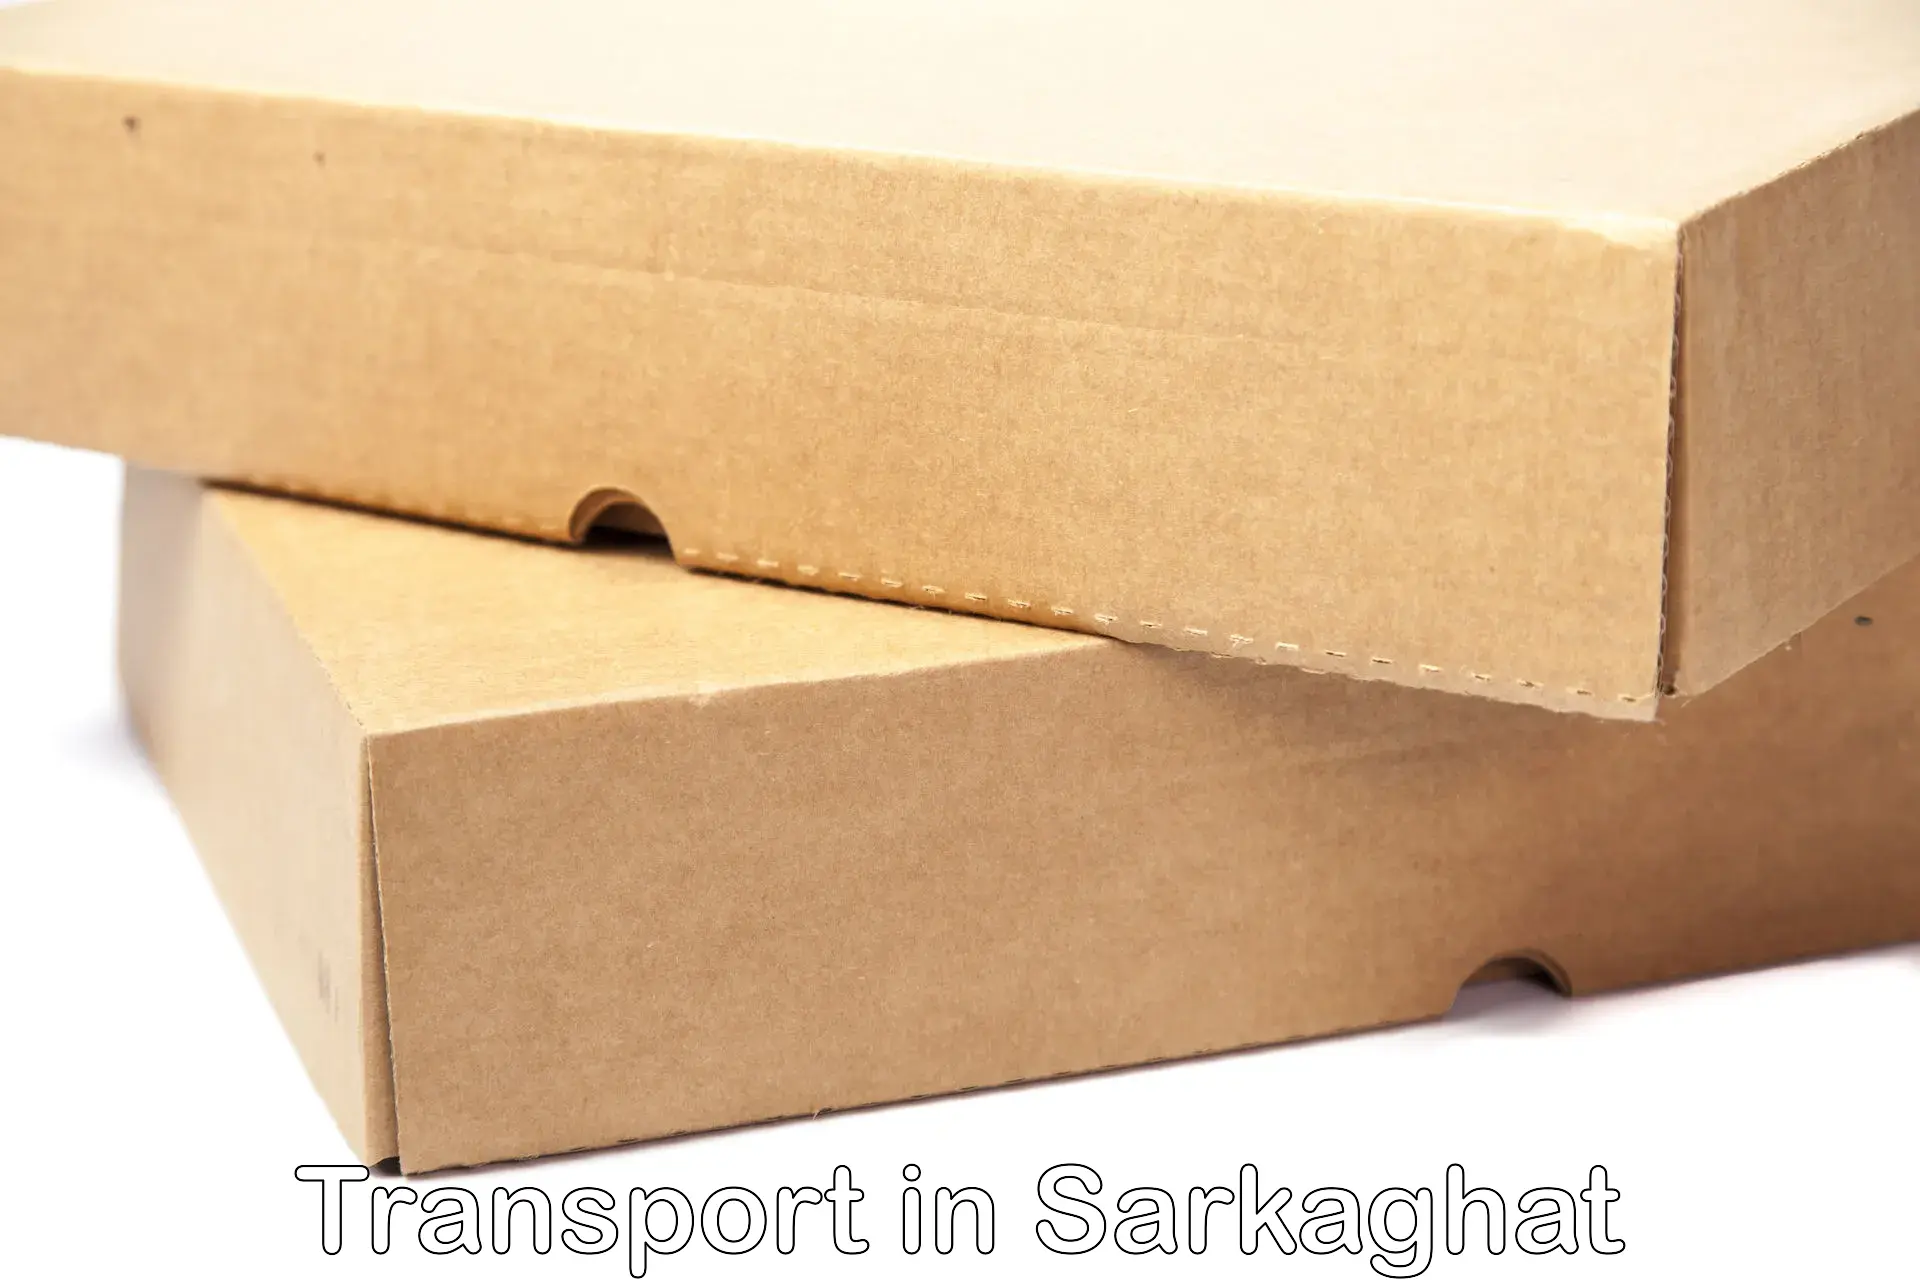 Air freight transport services in Sarkaghat